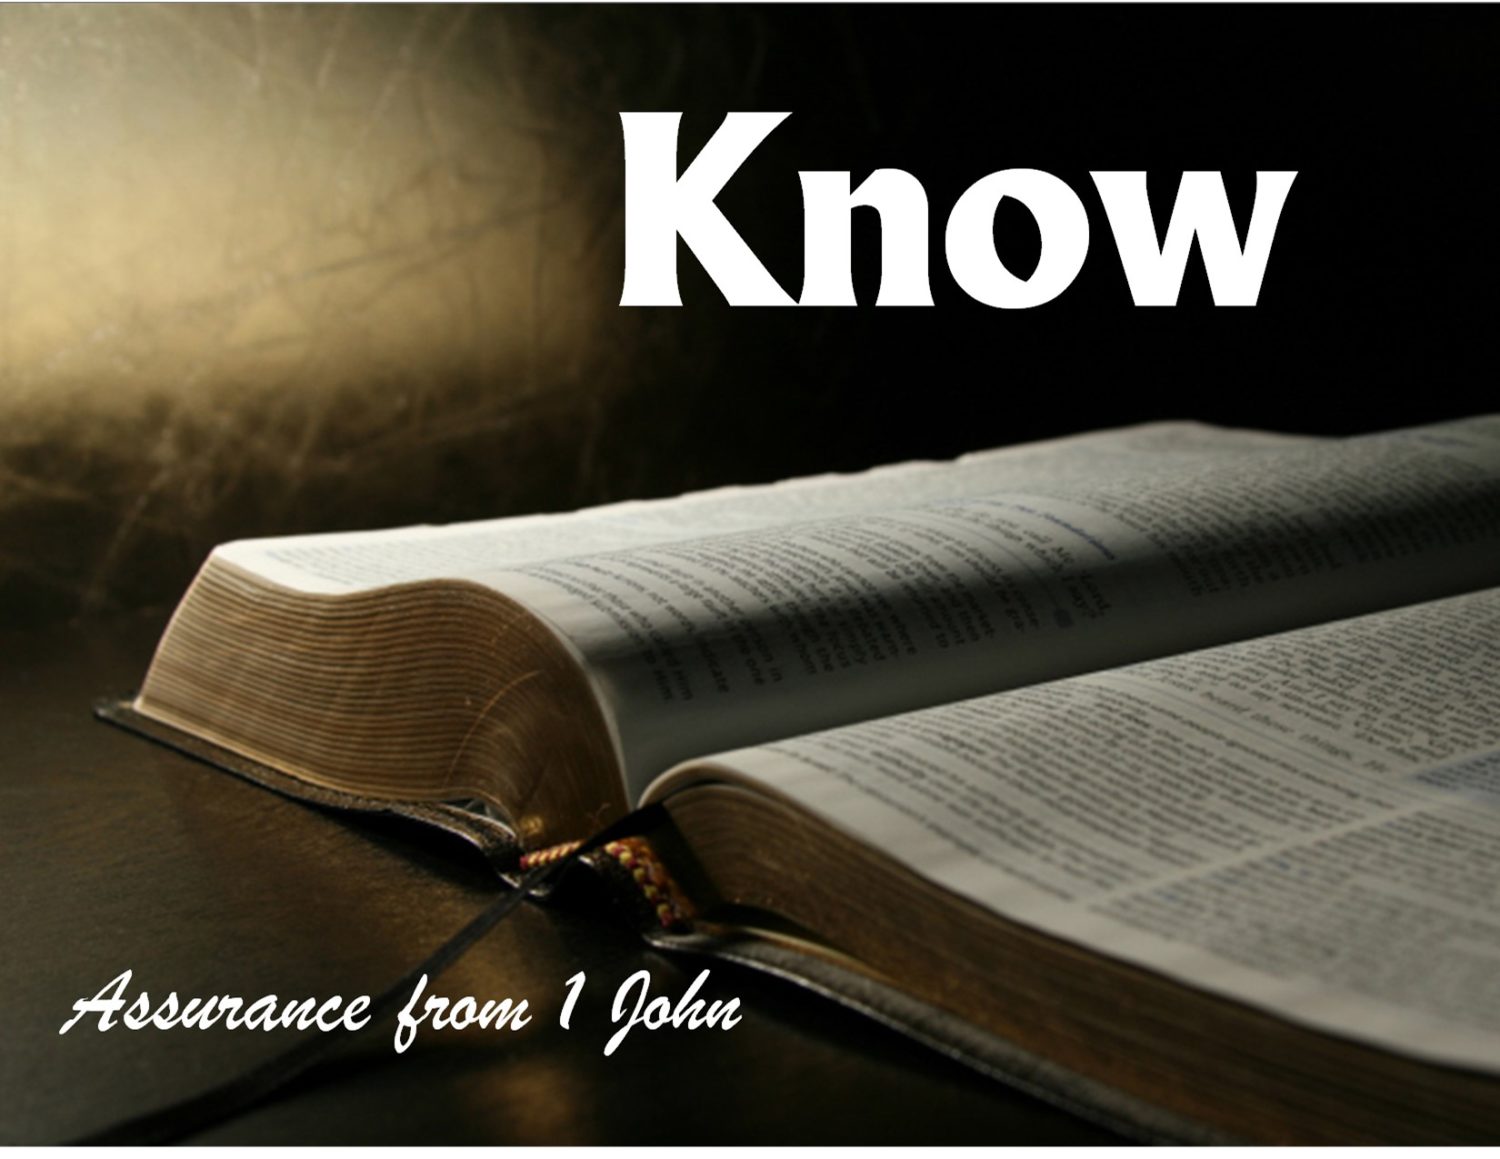 1. Know – Just So You Know